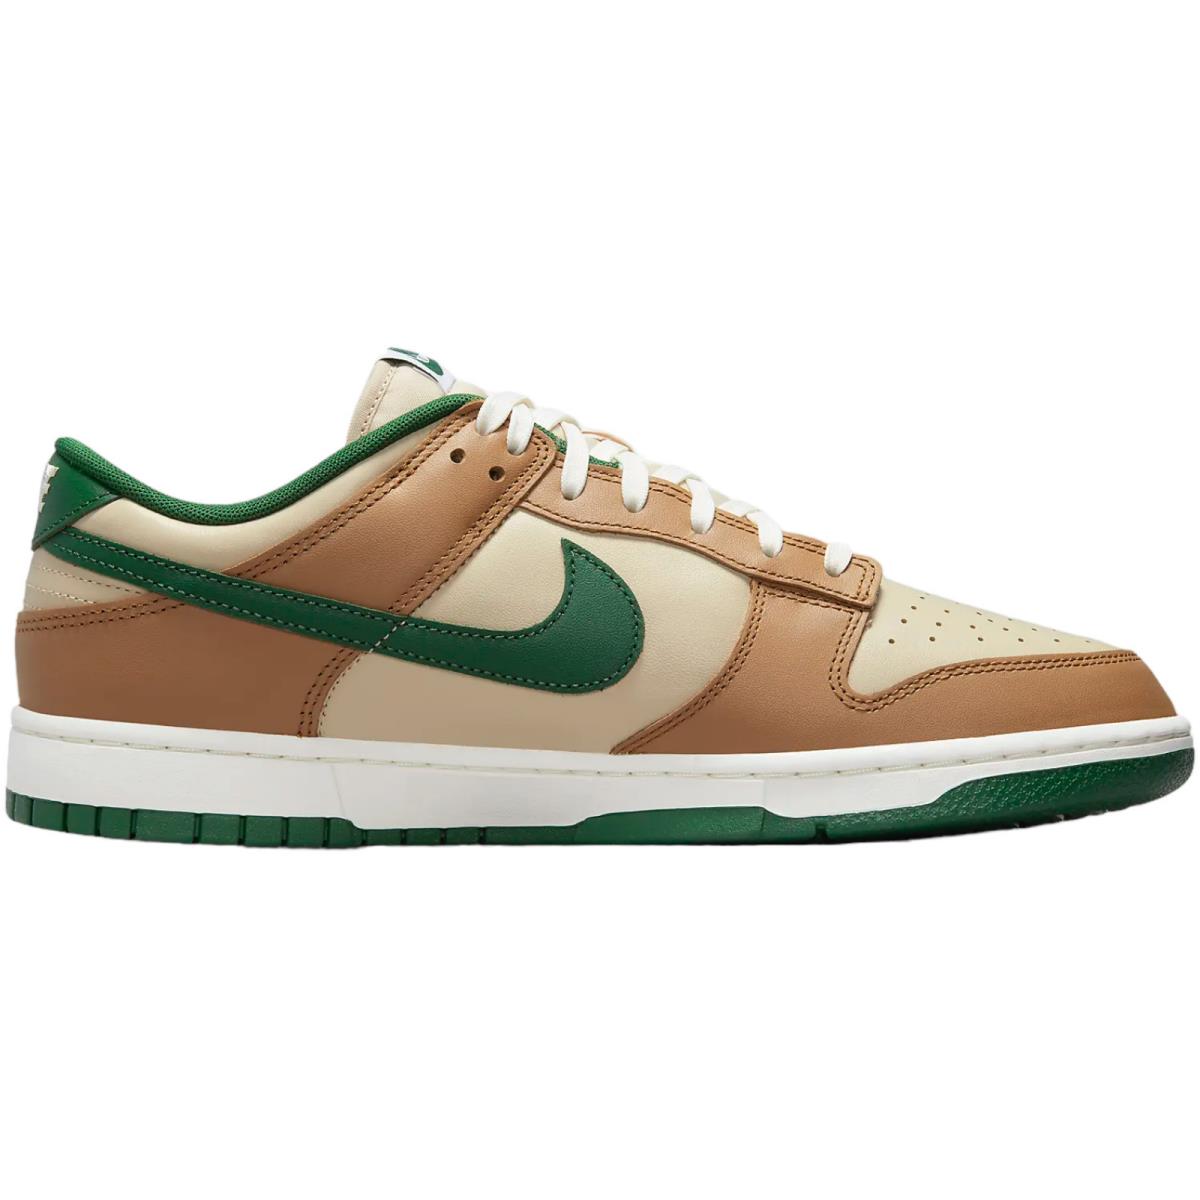 Nike Dunk Low Retro Men`s Casual Shoes All Colors US Sizes 7-14 Rattan/Sail/Dark Driftwood/Gorge Green